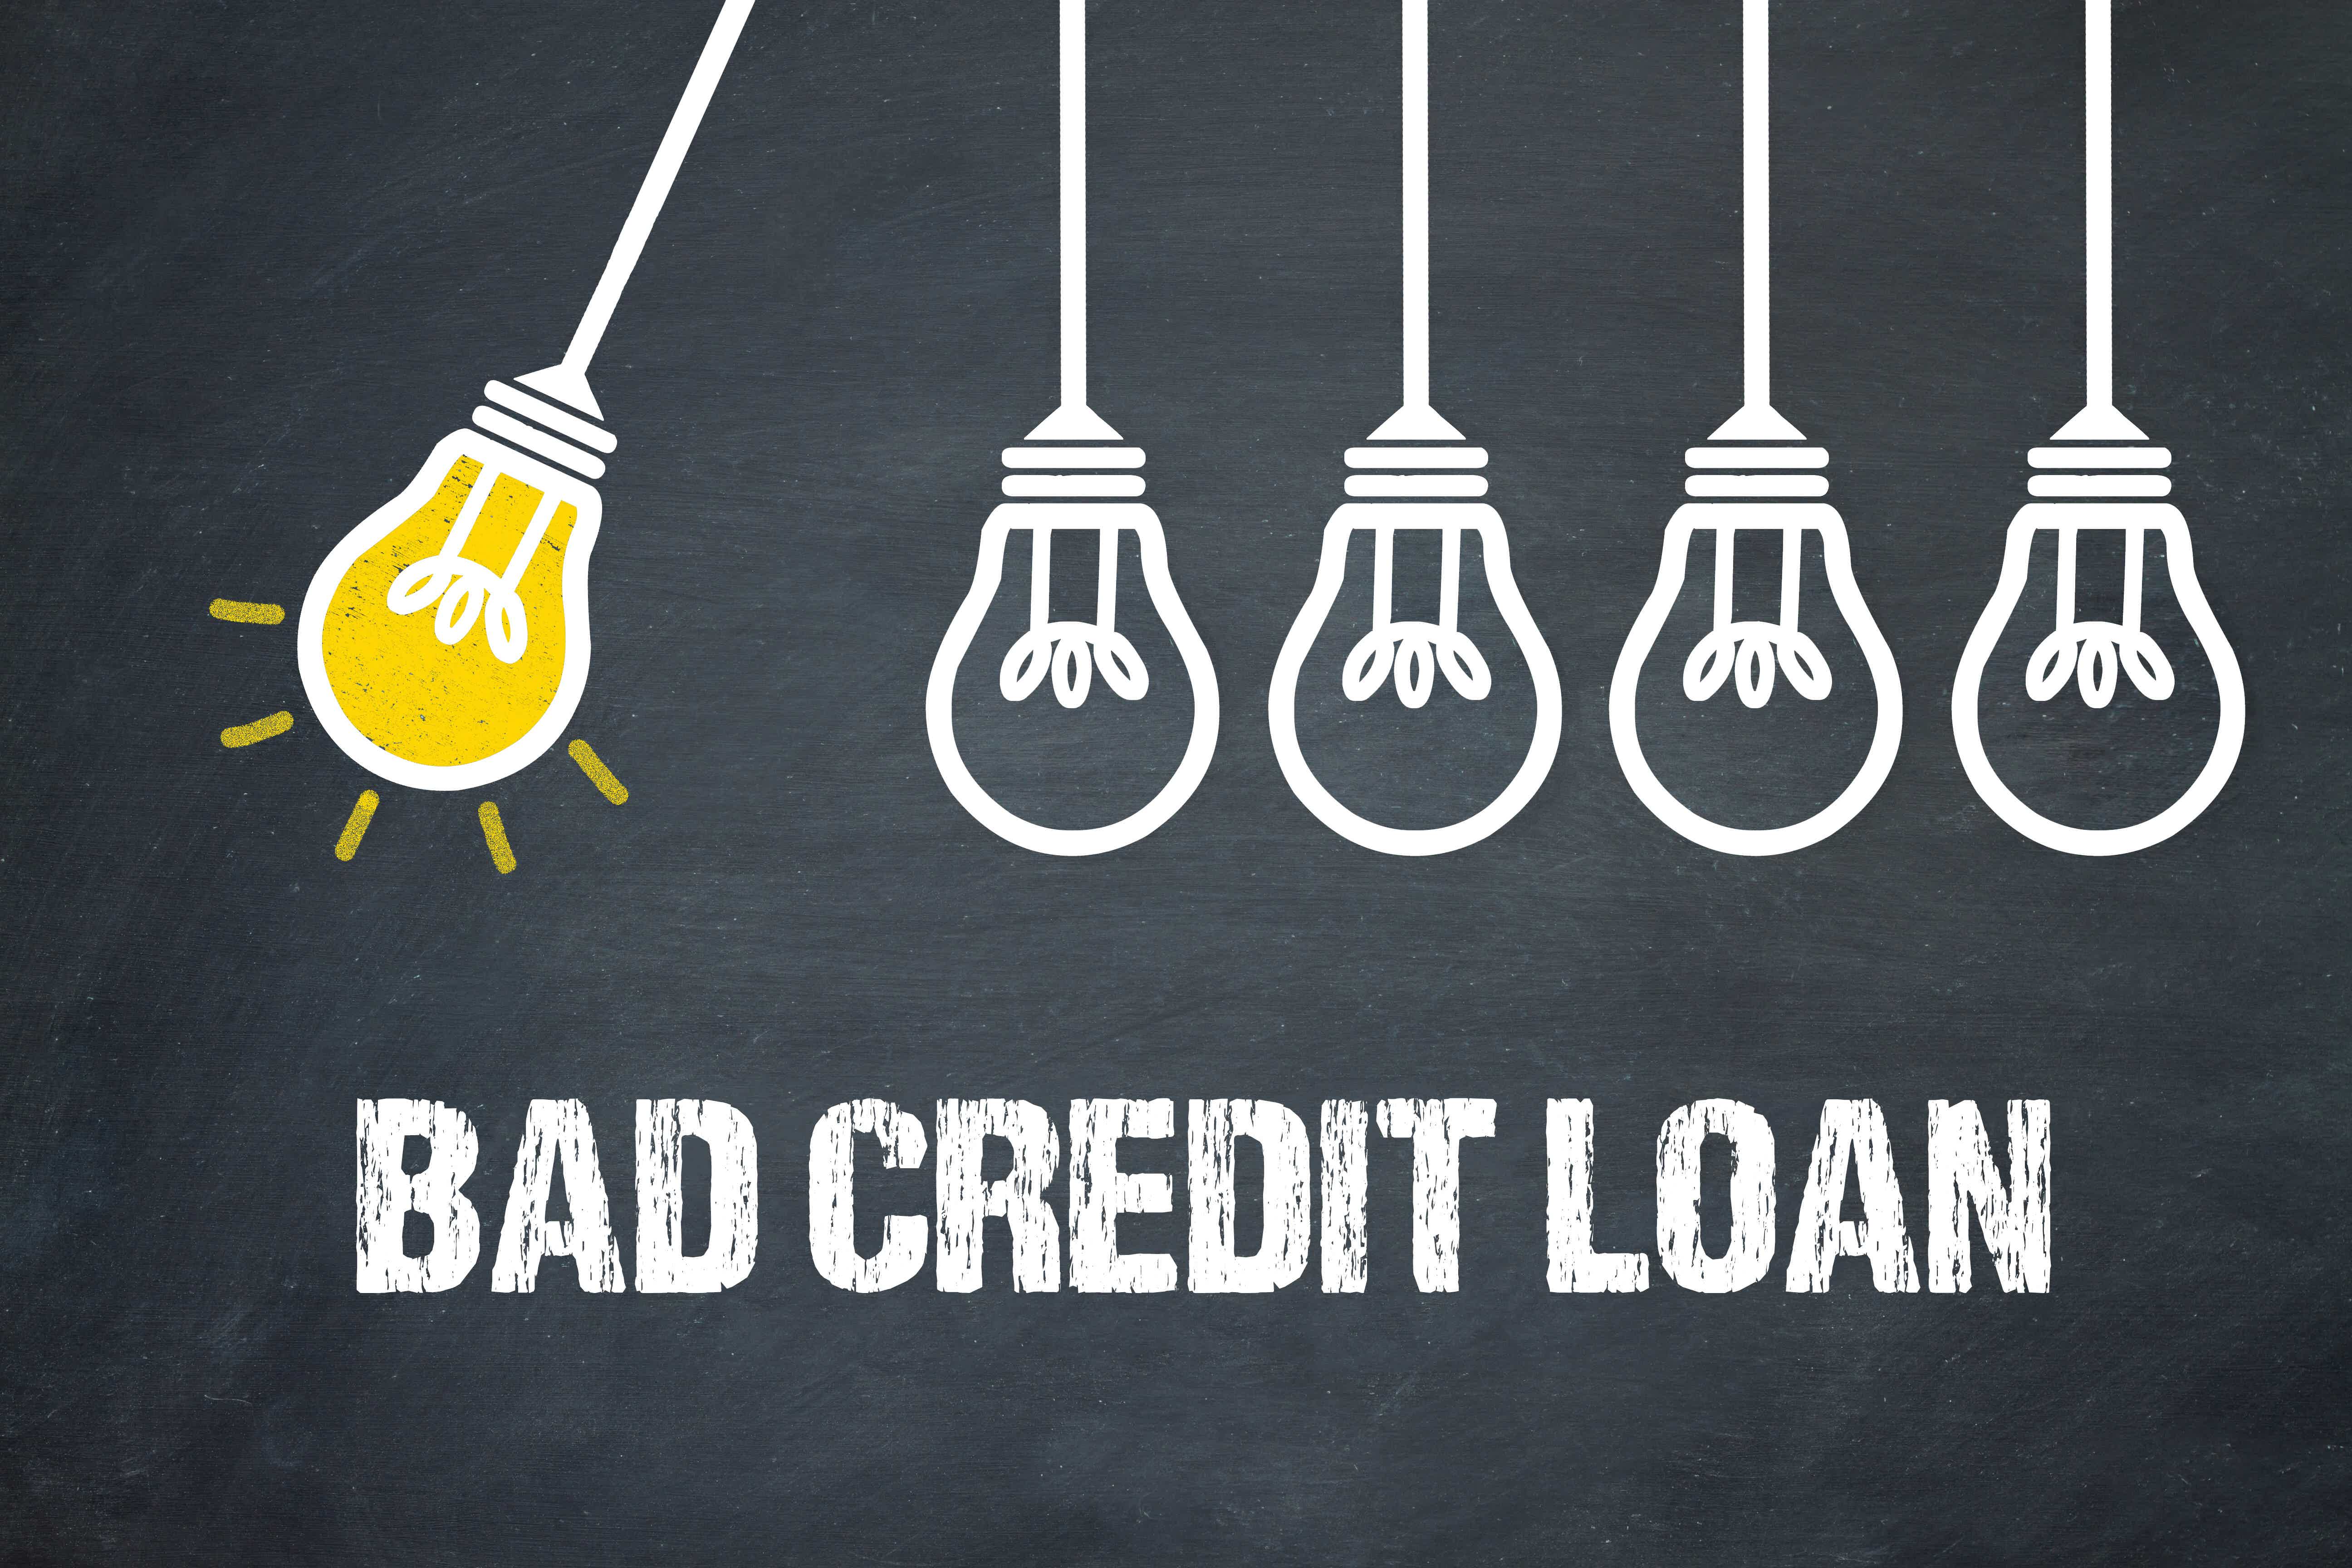 You can get a loan even if you have a less-than-perfect credit score. Source: Adobe Stock.